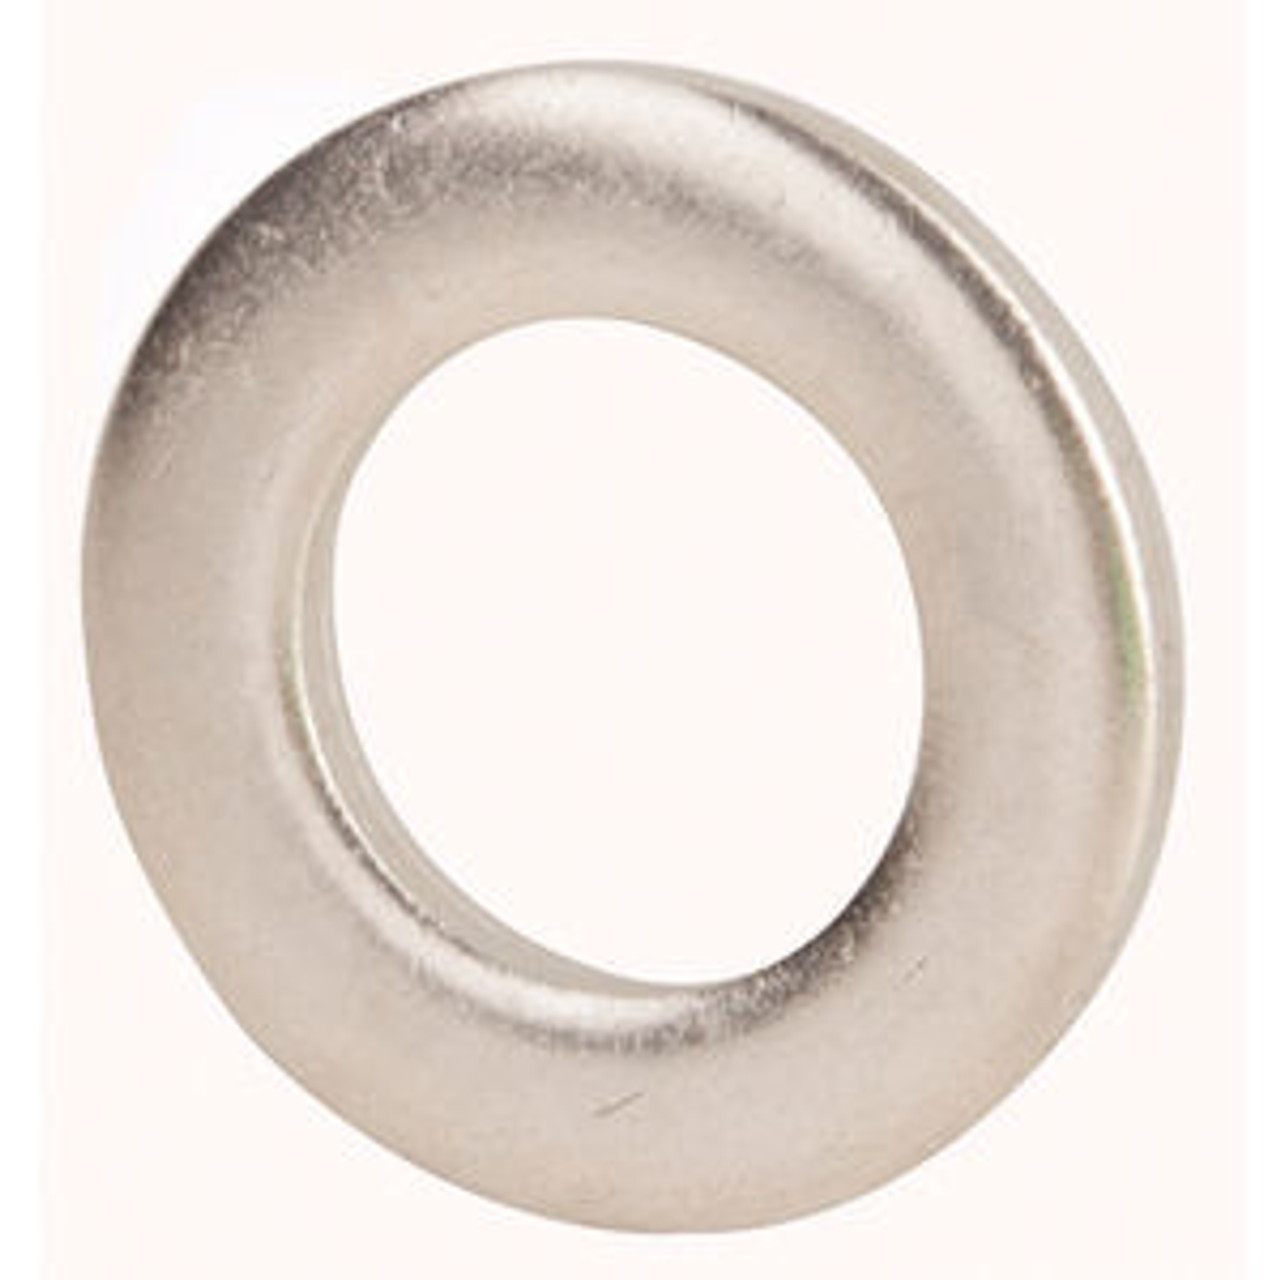 Washer M6 x 12mm flat stainless steel 999-6714 – Ships Fast from Our Huge  Inventory